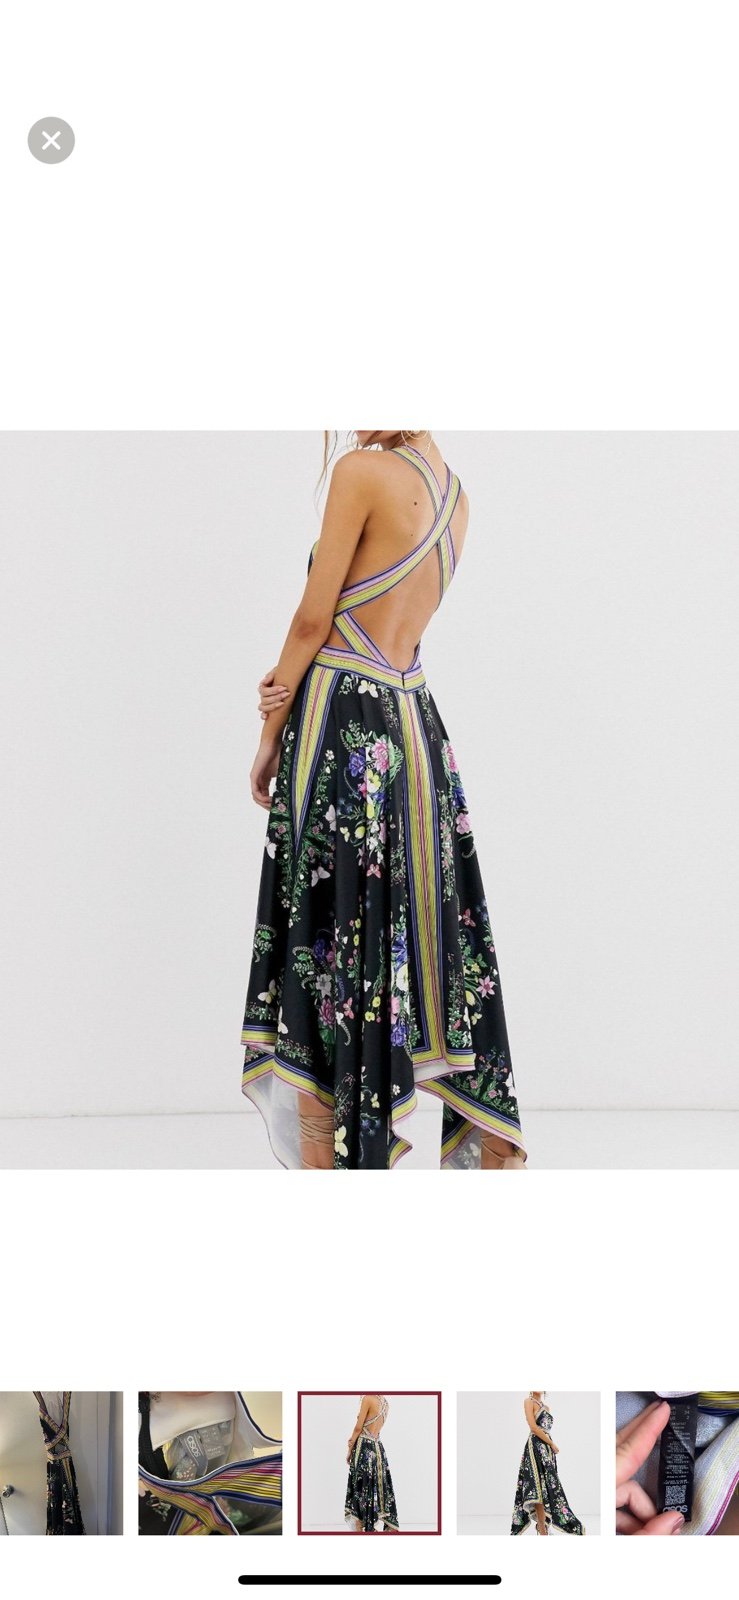 Comfortable ASOS EDITION Scarf print halter midi dress with cutout sides nRZc0W9cr just buy it